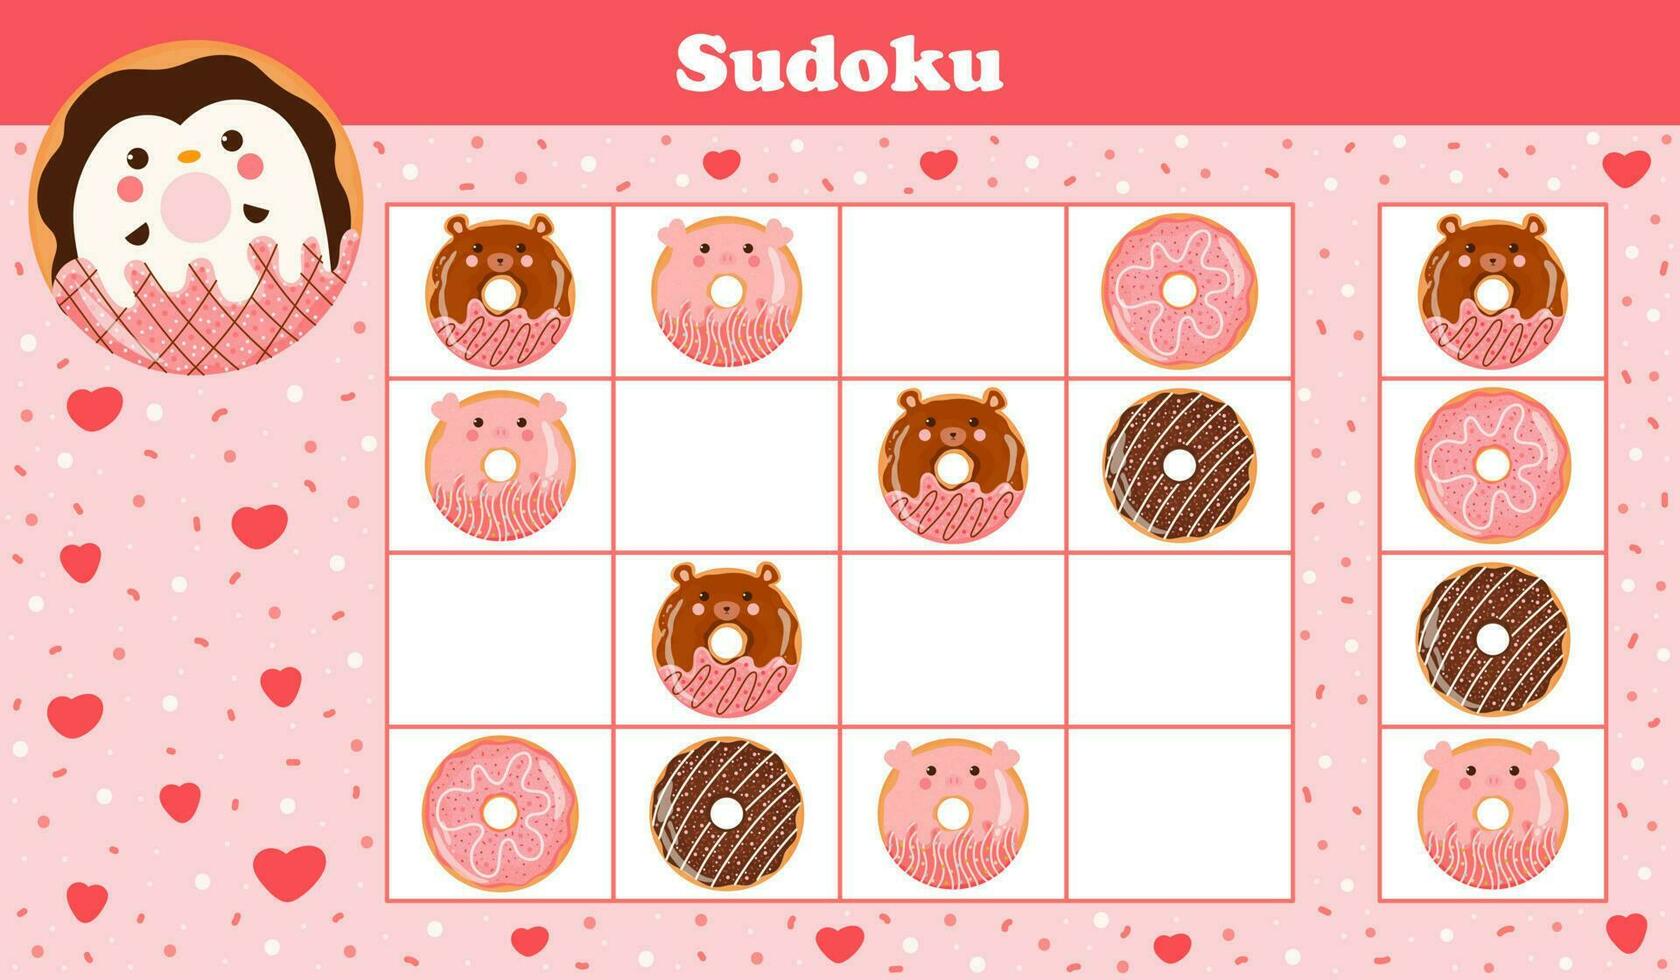 Printable sudoku worksheet for kids with cute animal donuts with penguin, pig and bear, puzzle for children book in cartoon style vector